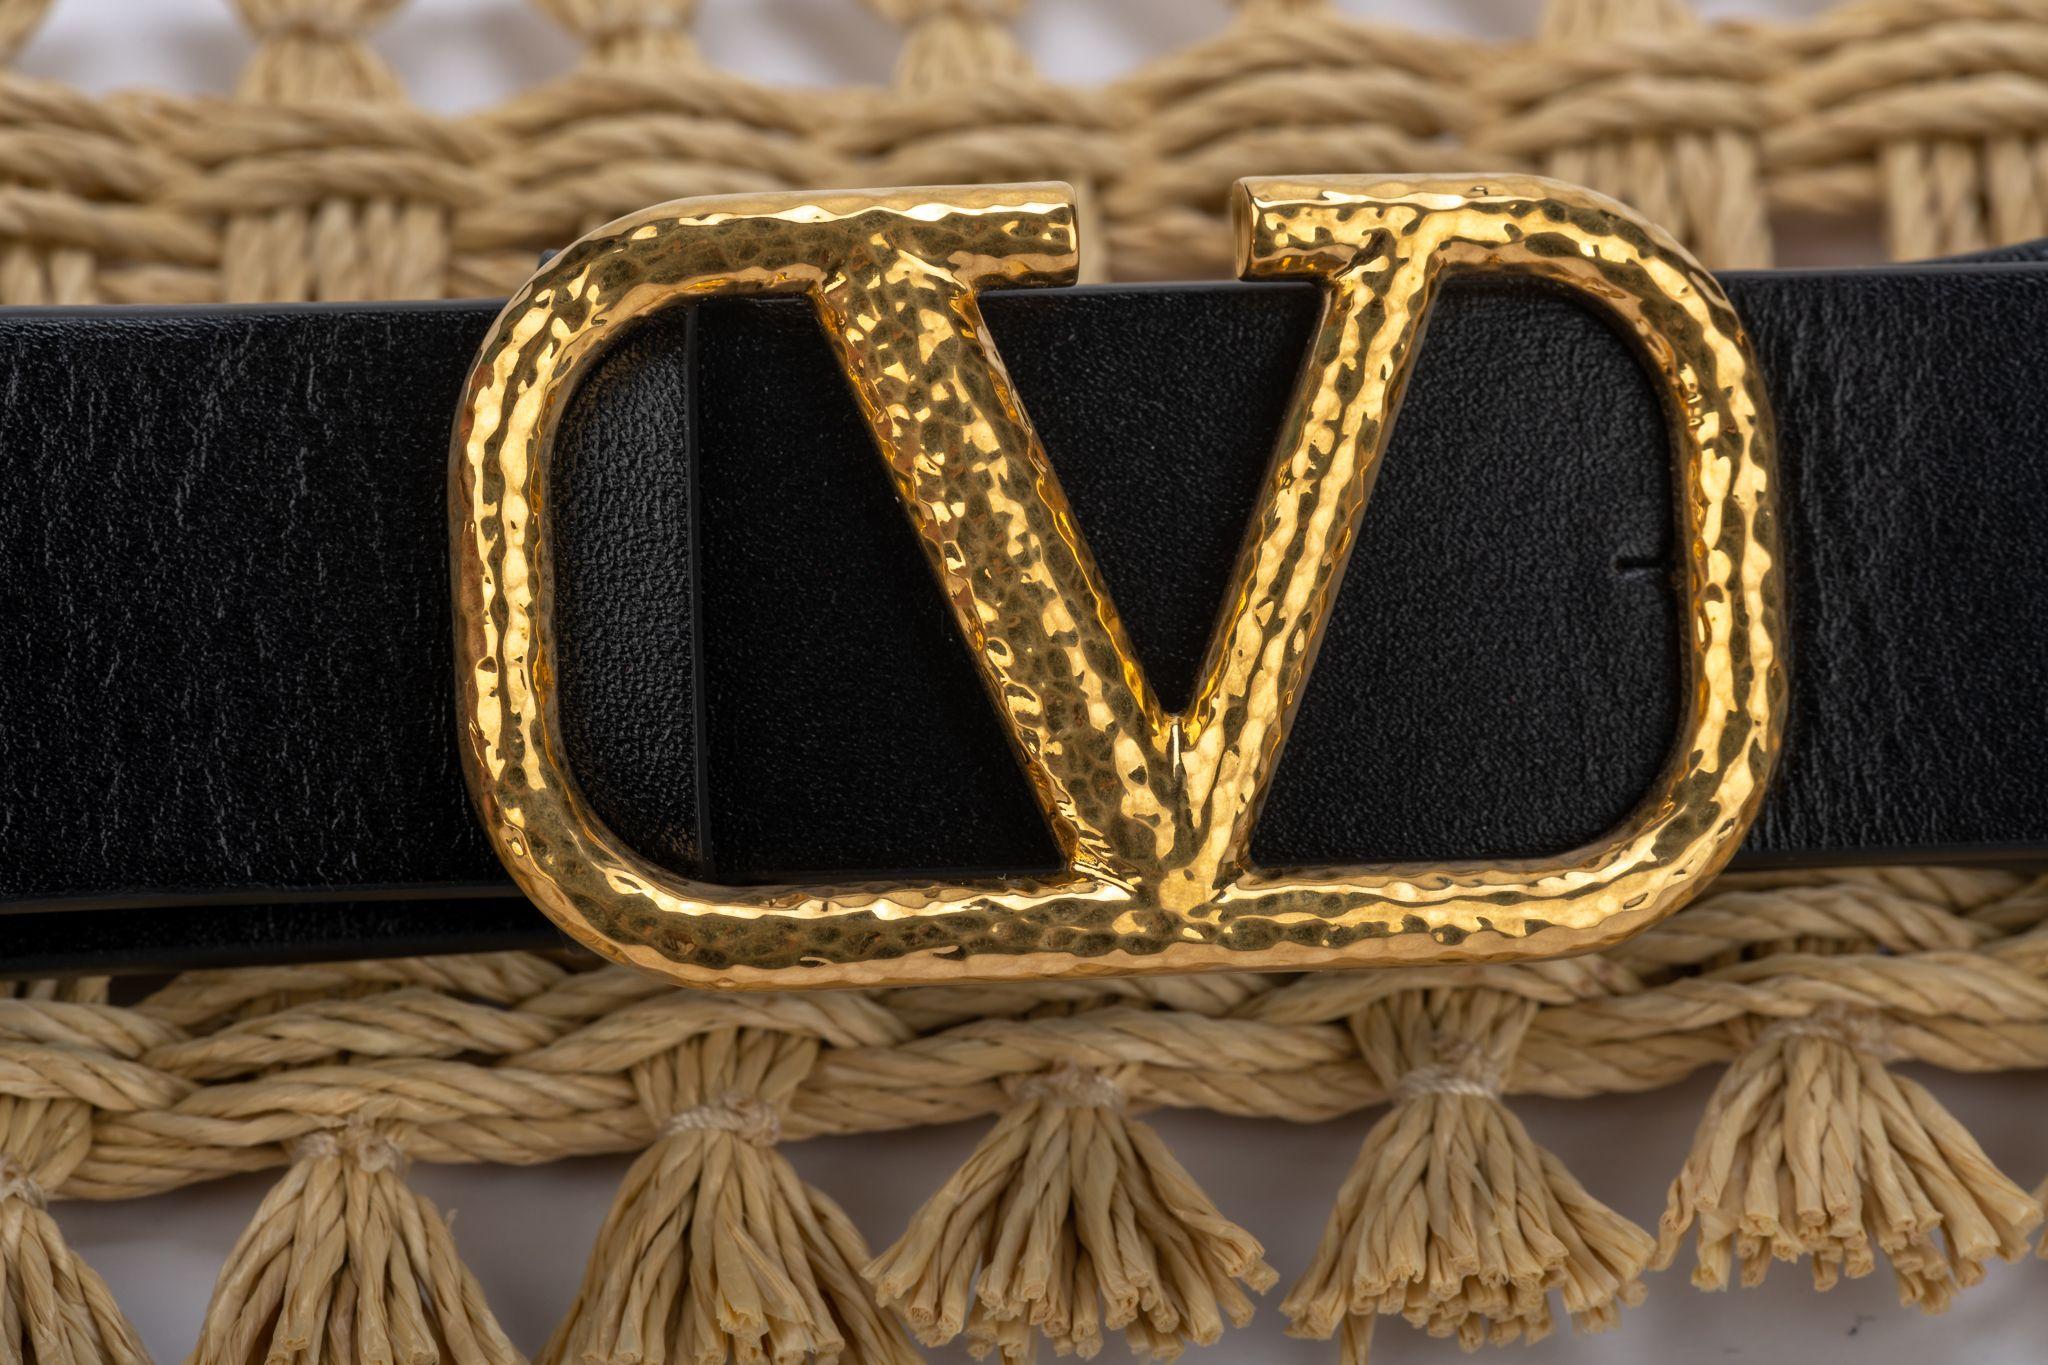 Valentino new wide woven raffia and black leather logo belt, gold hammered buckle. 85 cm/34”, original dust cover and box .